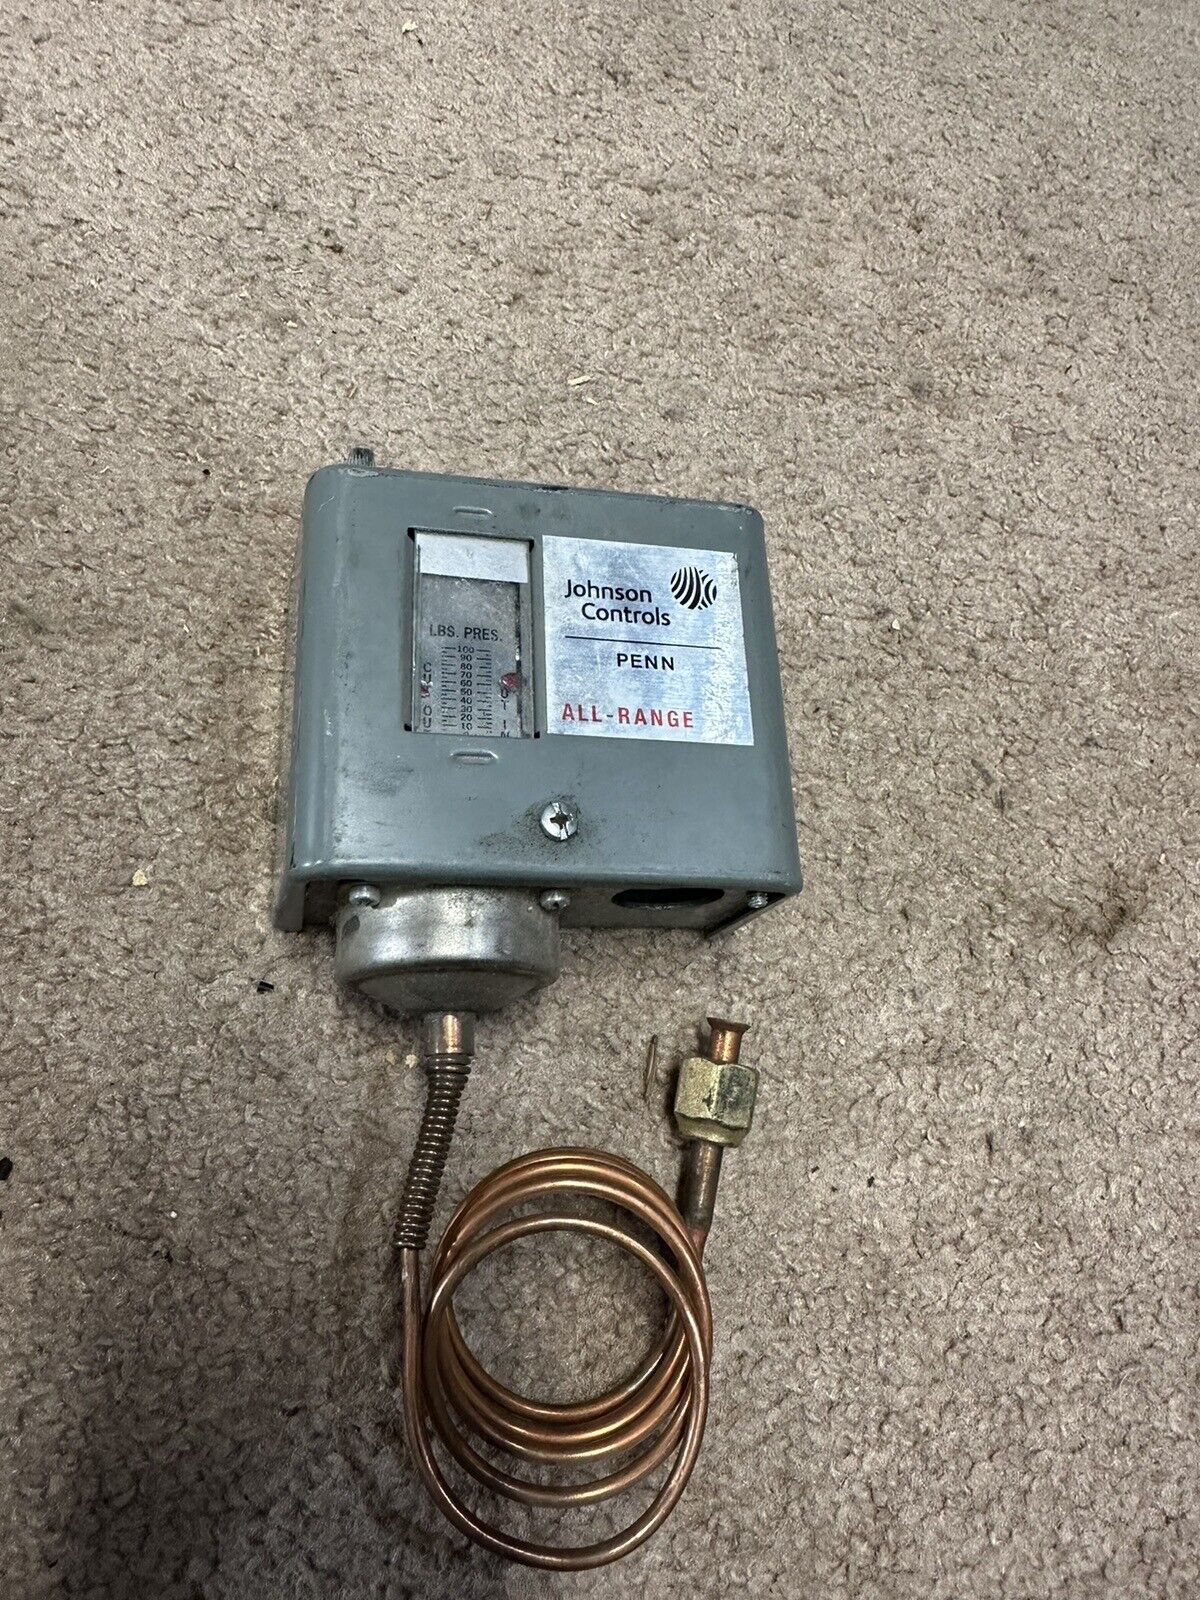 Penn Johnson Controls P70AB-2C Low Side Pressure Control Open Box Old Stock